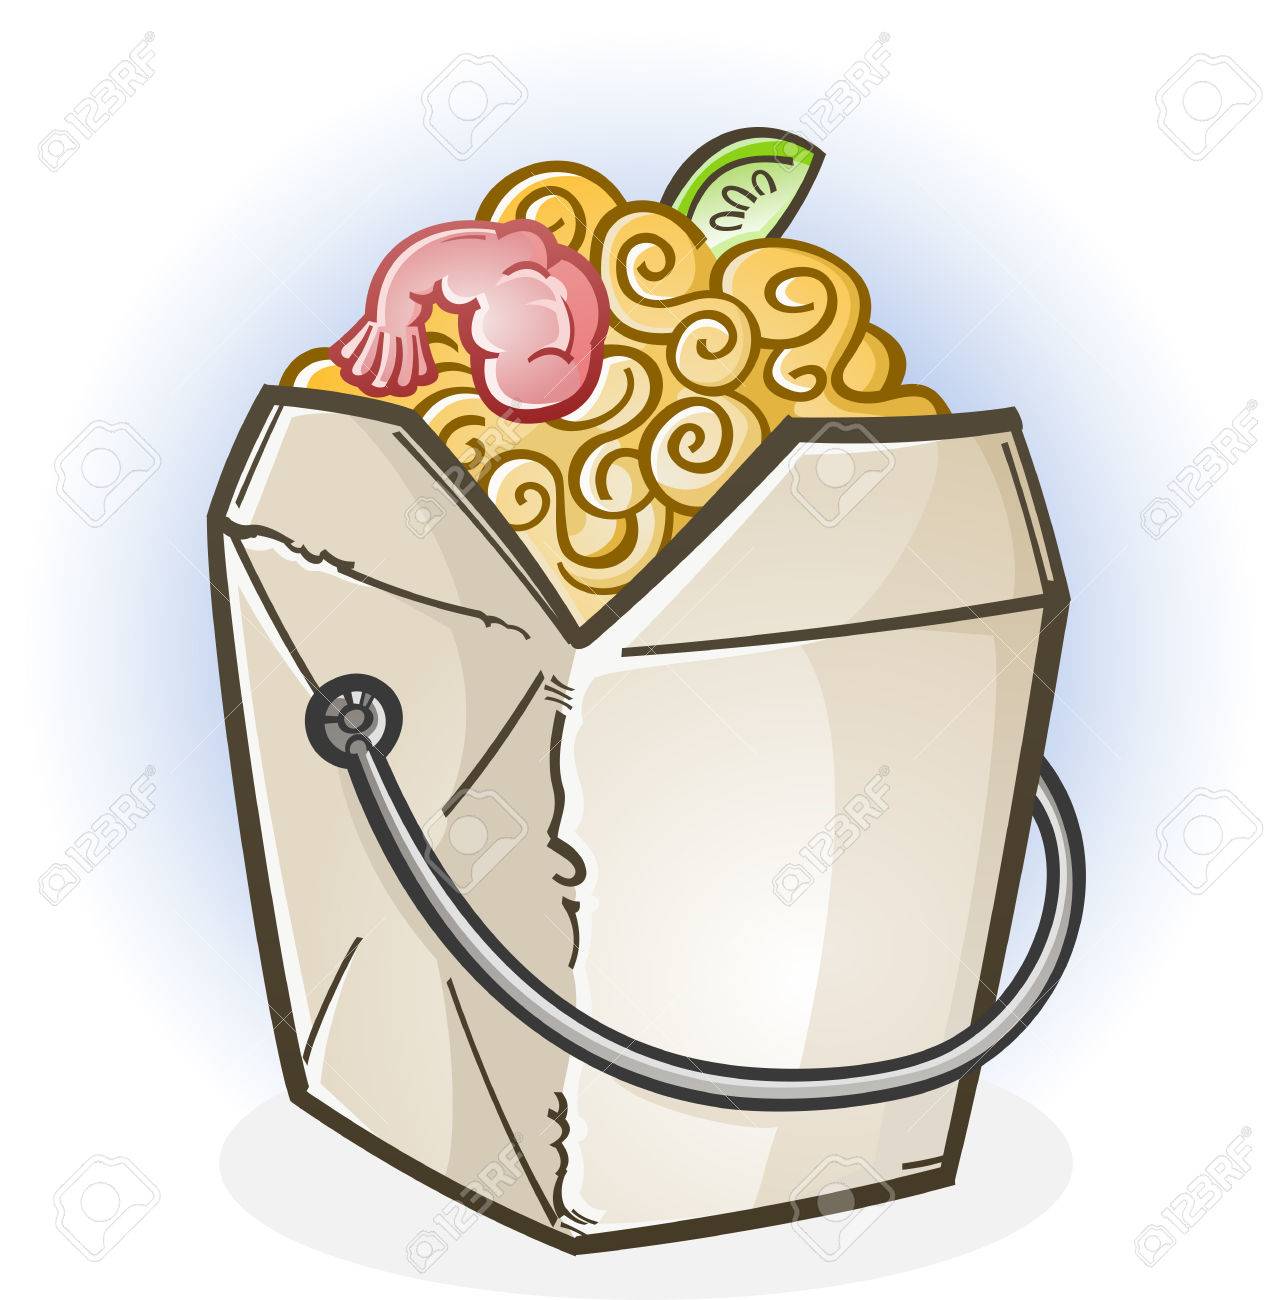 325 Chinese Food free clipart.